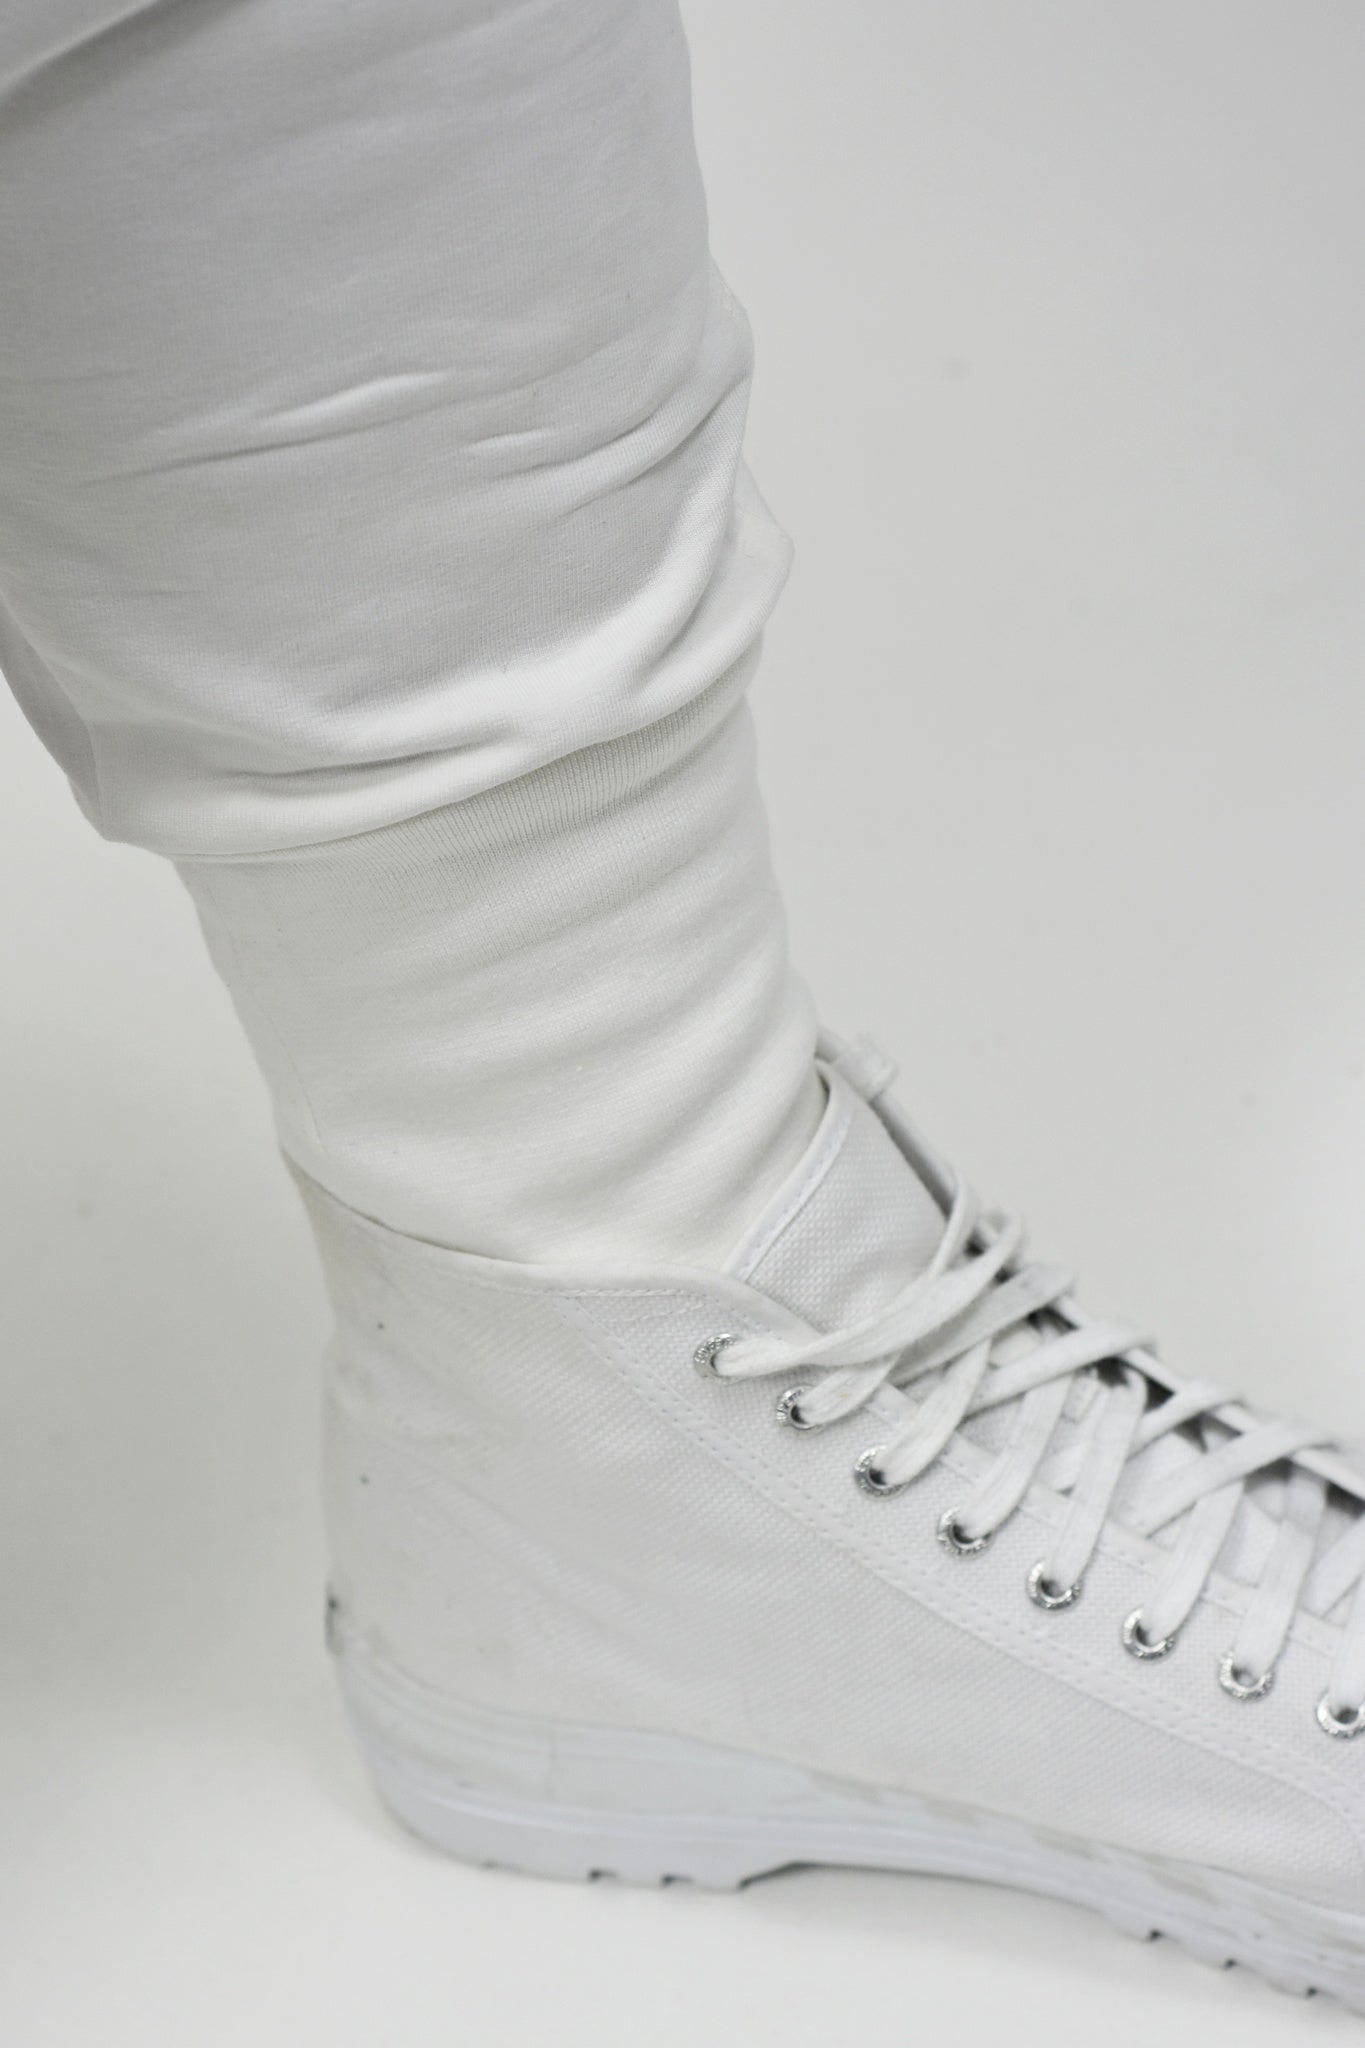 Menswear Off-white Trackpants with Long Cuff and Zip detail ZG5480